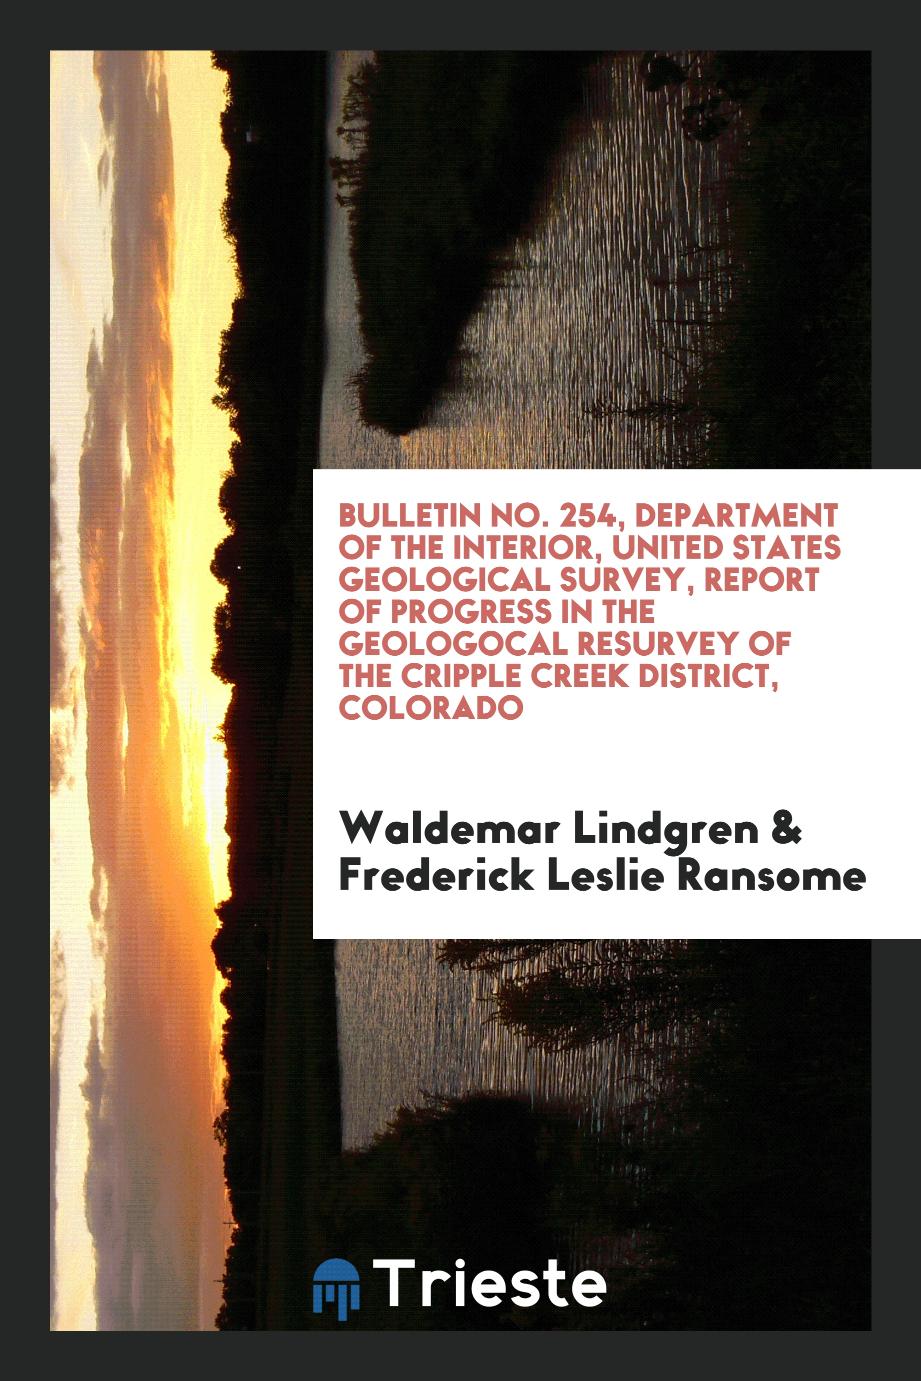 Bulletin No. 254, Department of the interior, United States Geological Survey, Report of Progress in the Geologocal resurvey of the cripple creek district, Colorado